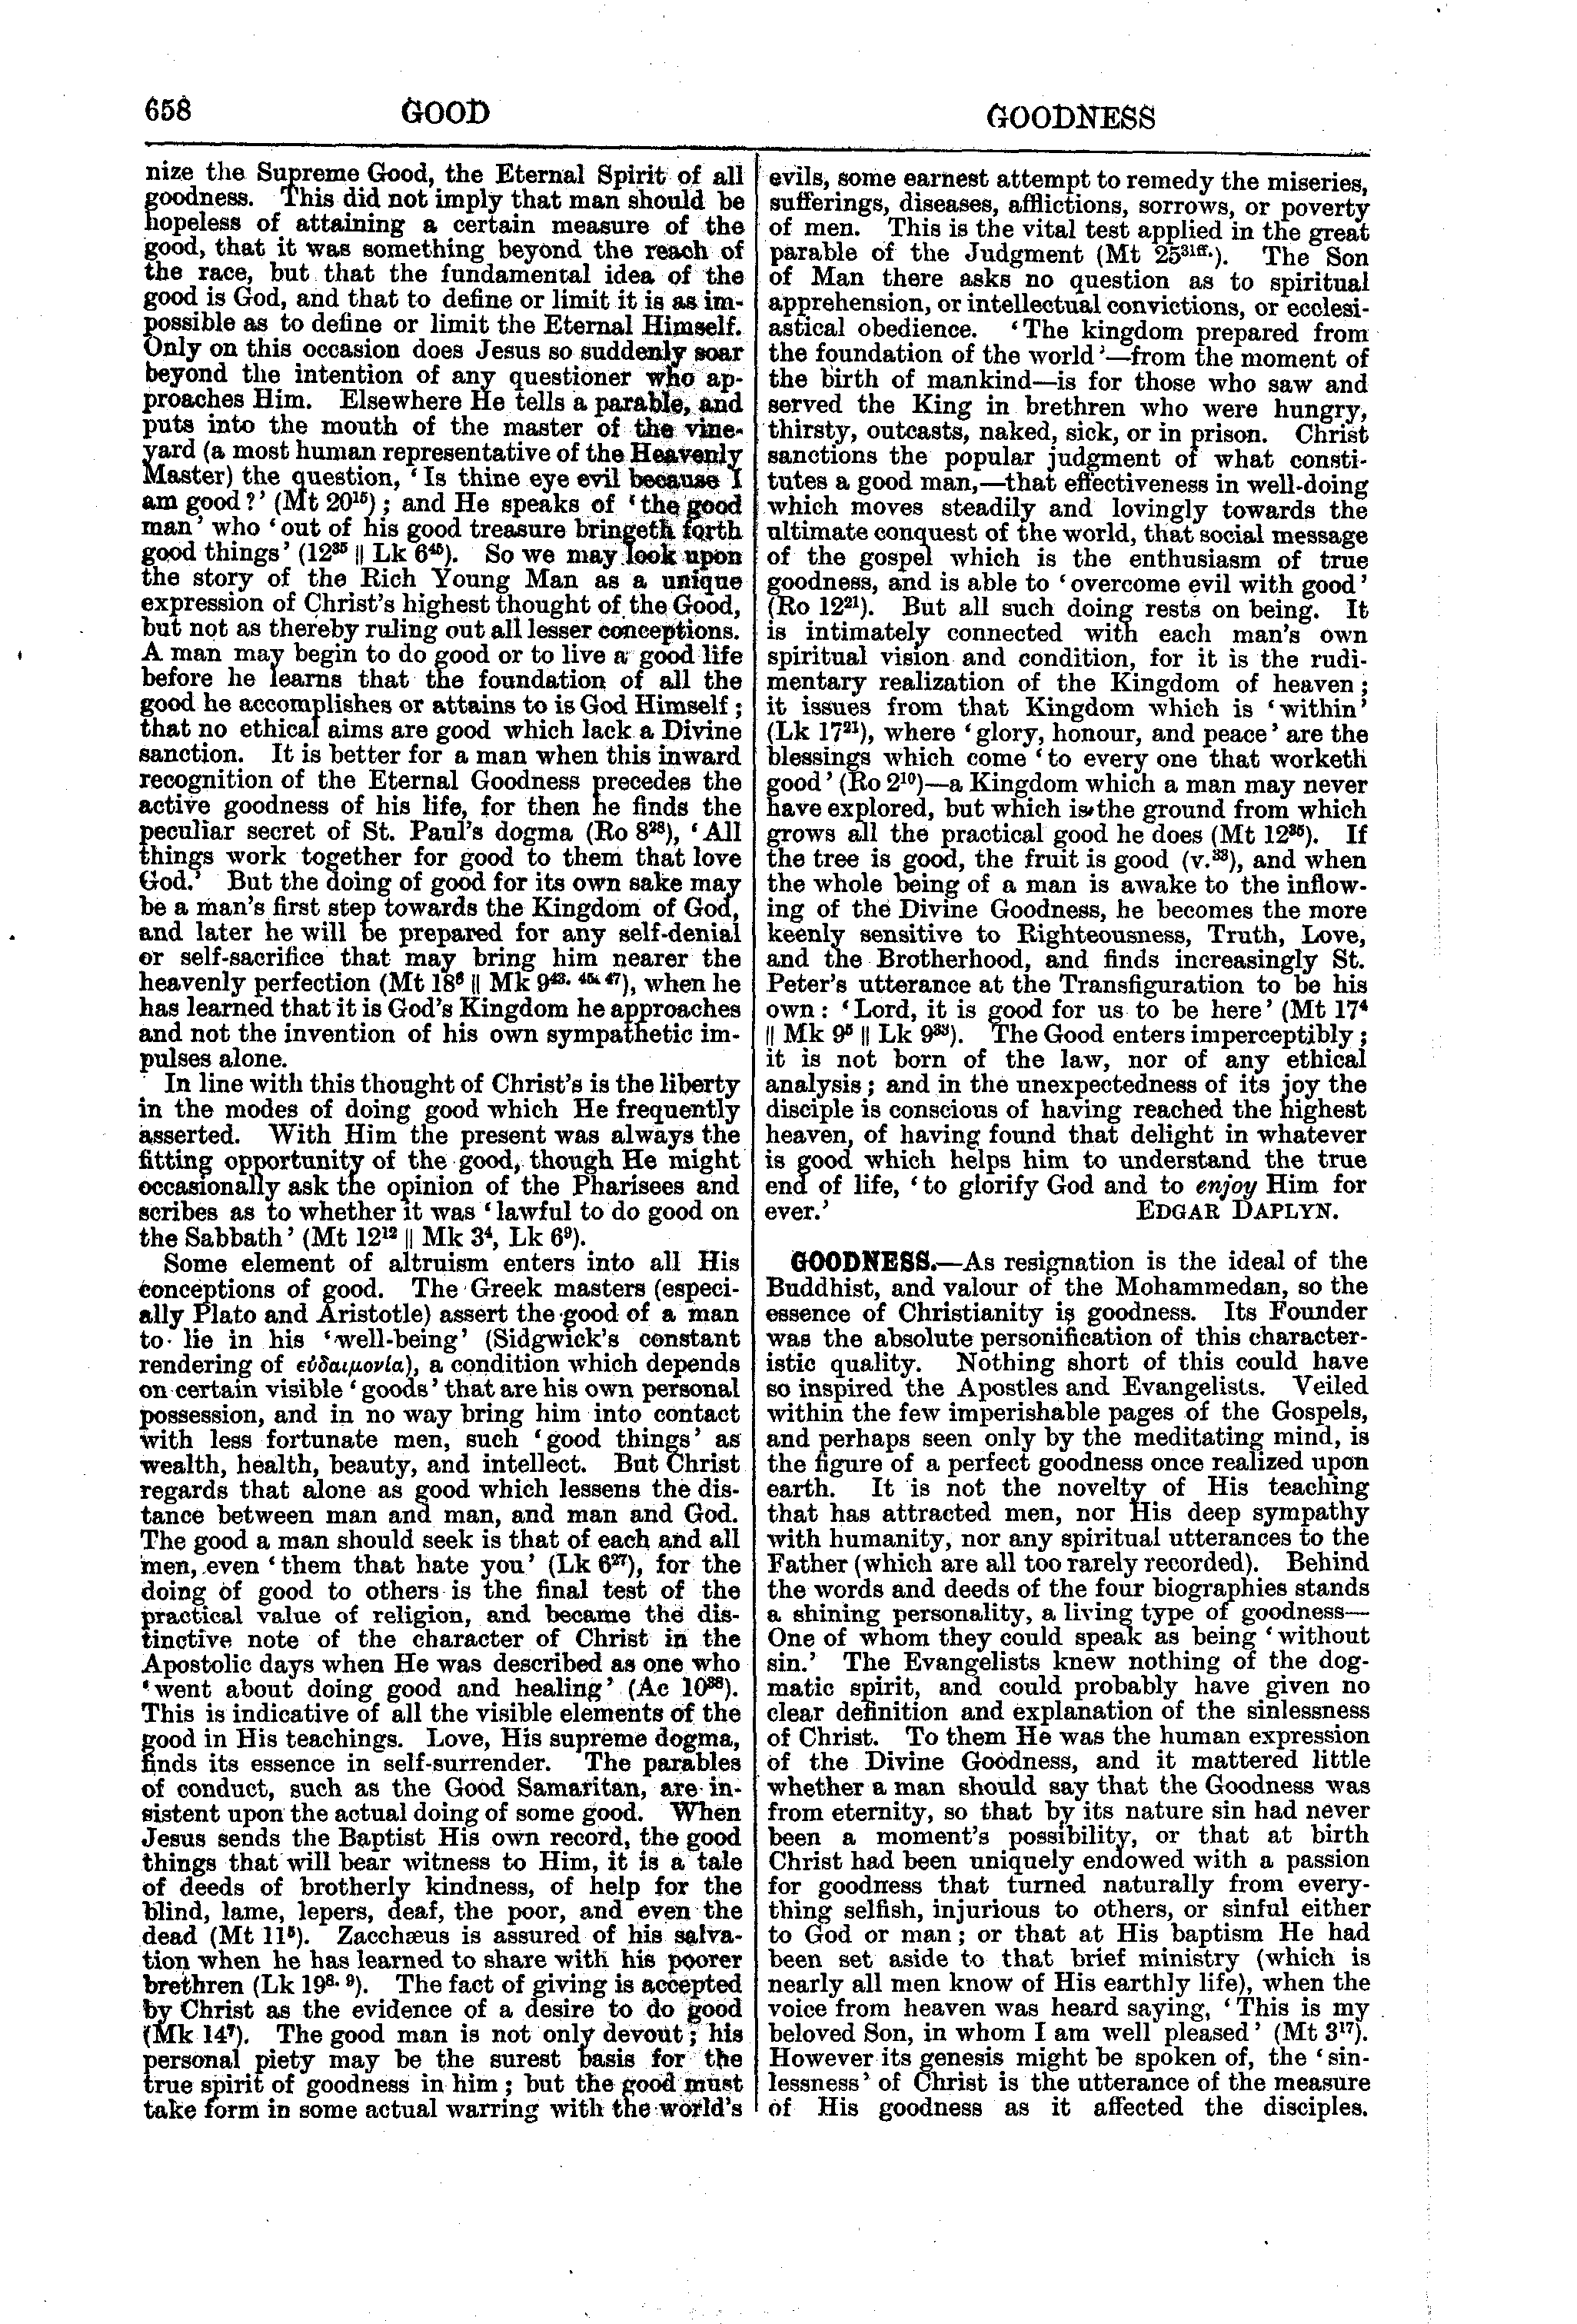 Image of page 658